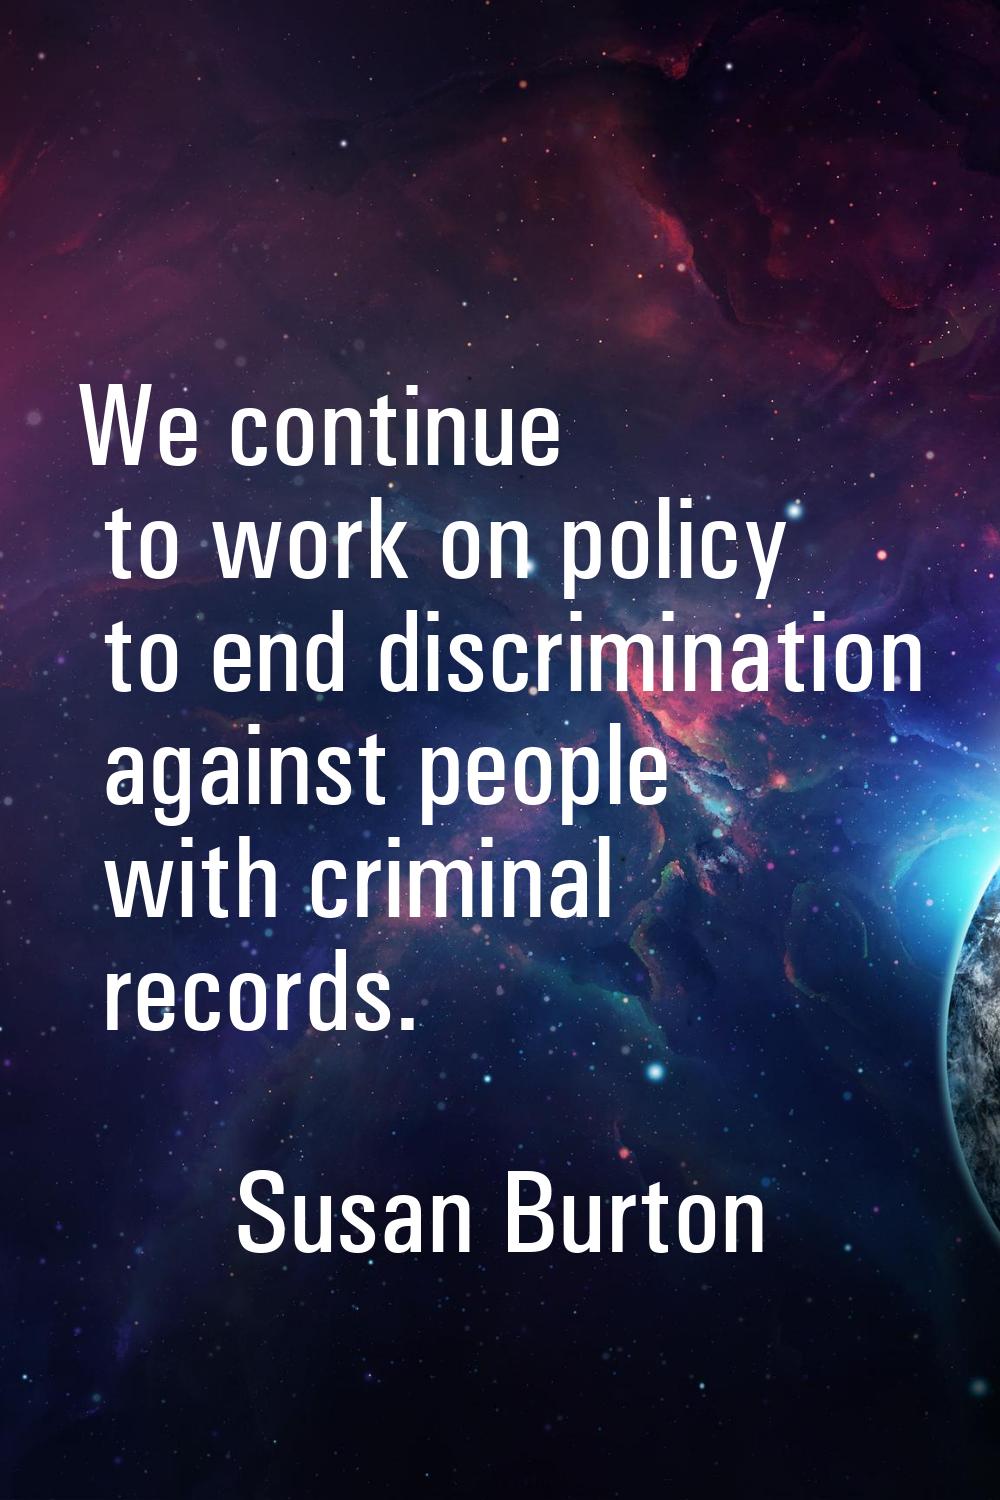 We continue to work on policy to end discrimination against people with criminal records.